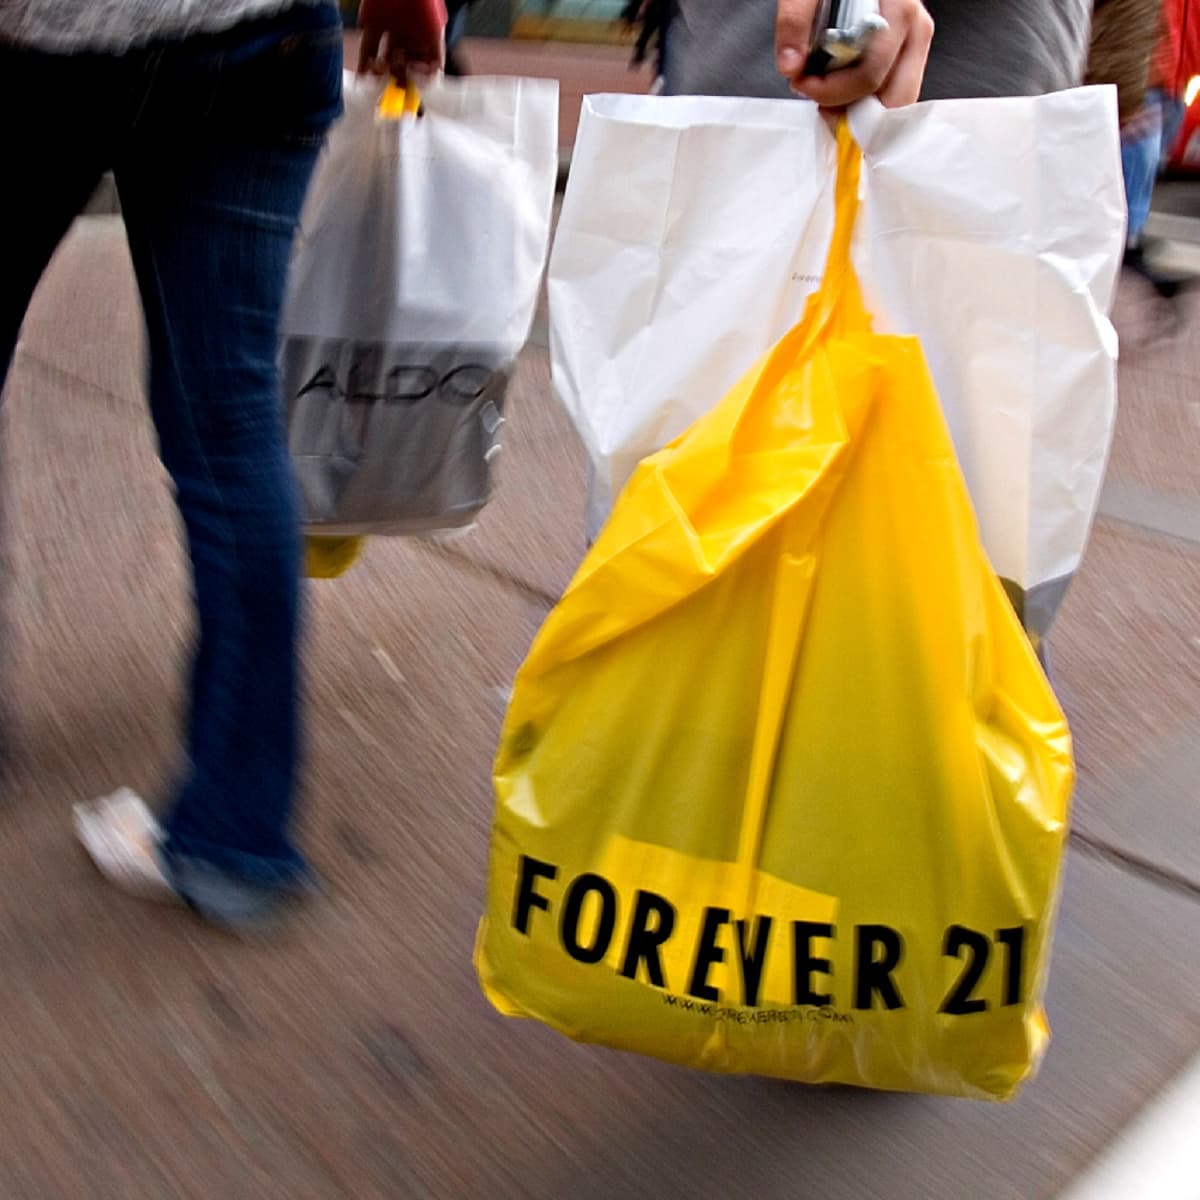 Forever 21 Filed for Bankruptcy and Will Close Nearly 350 Stores